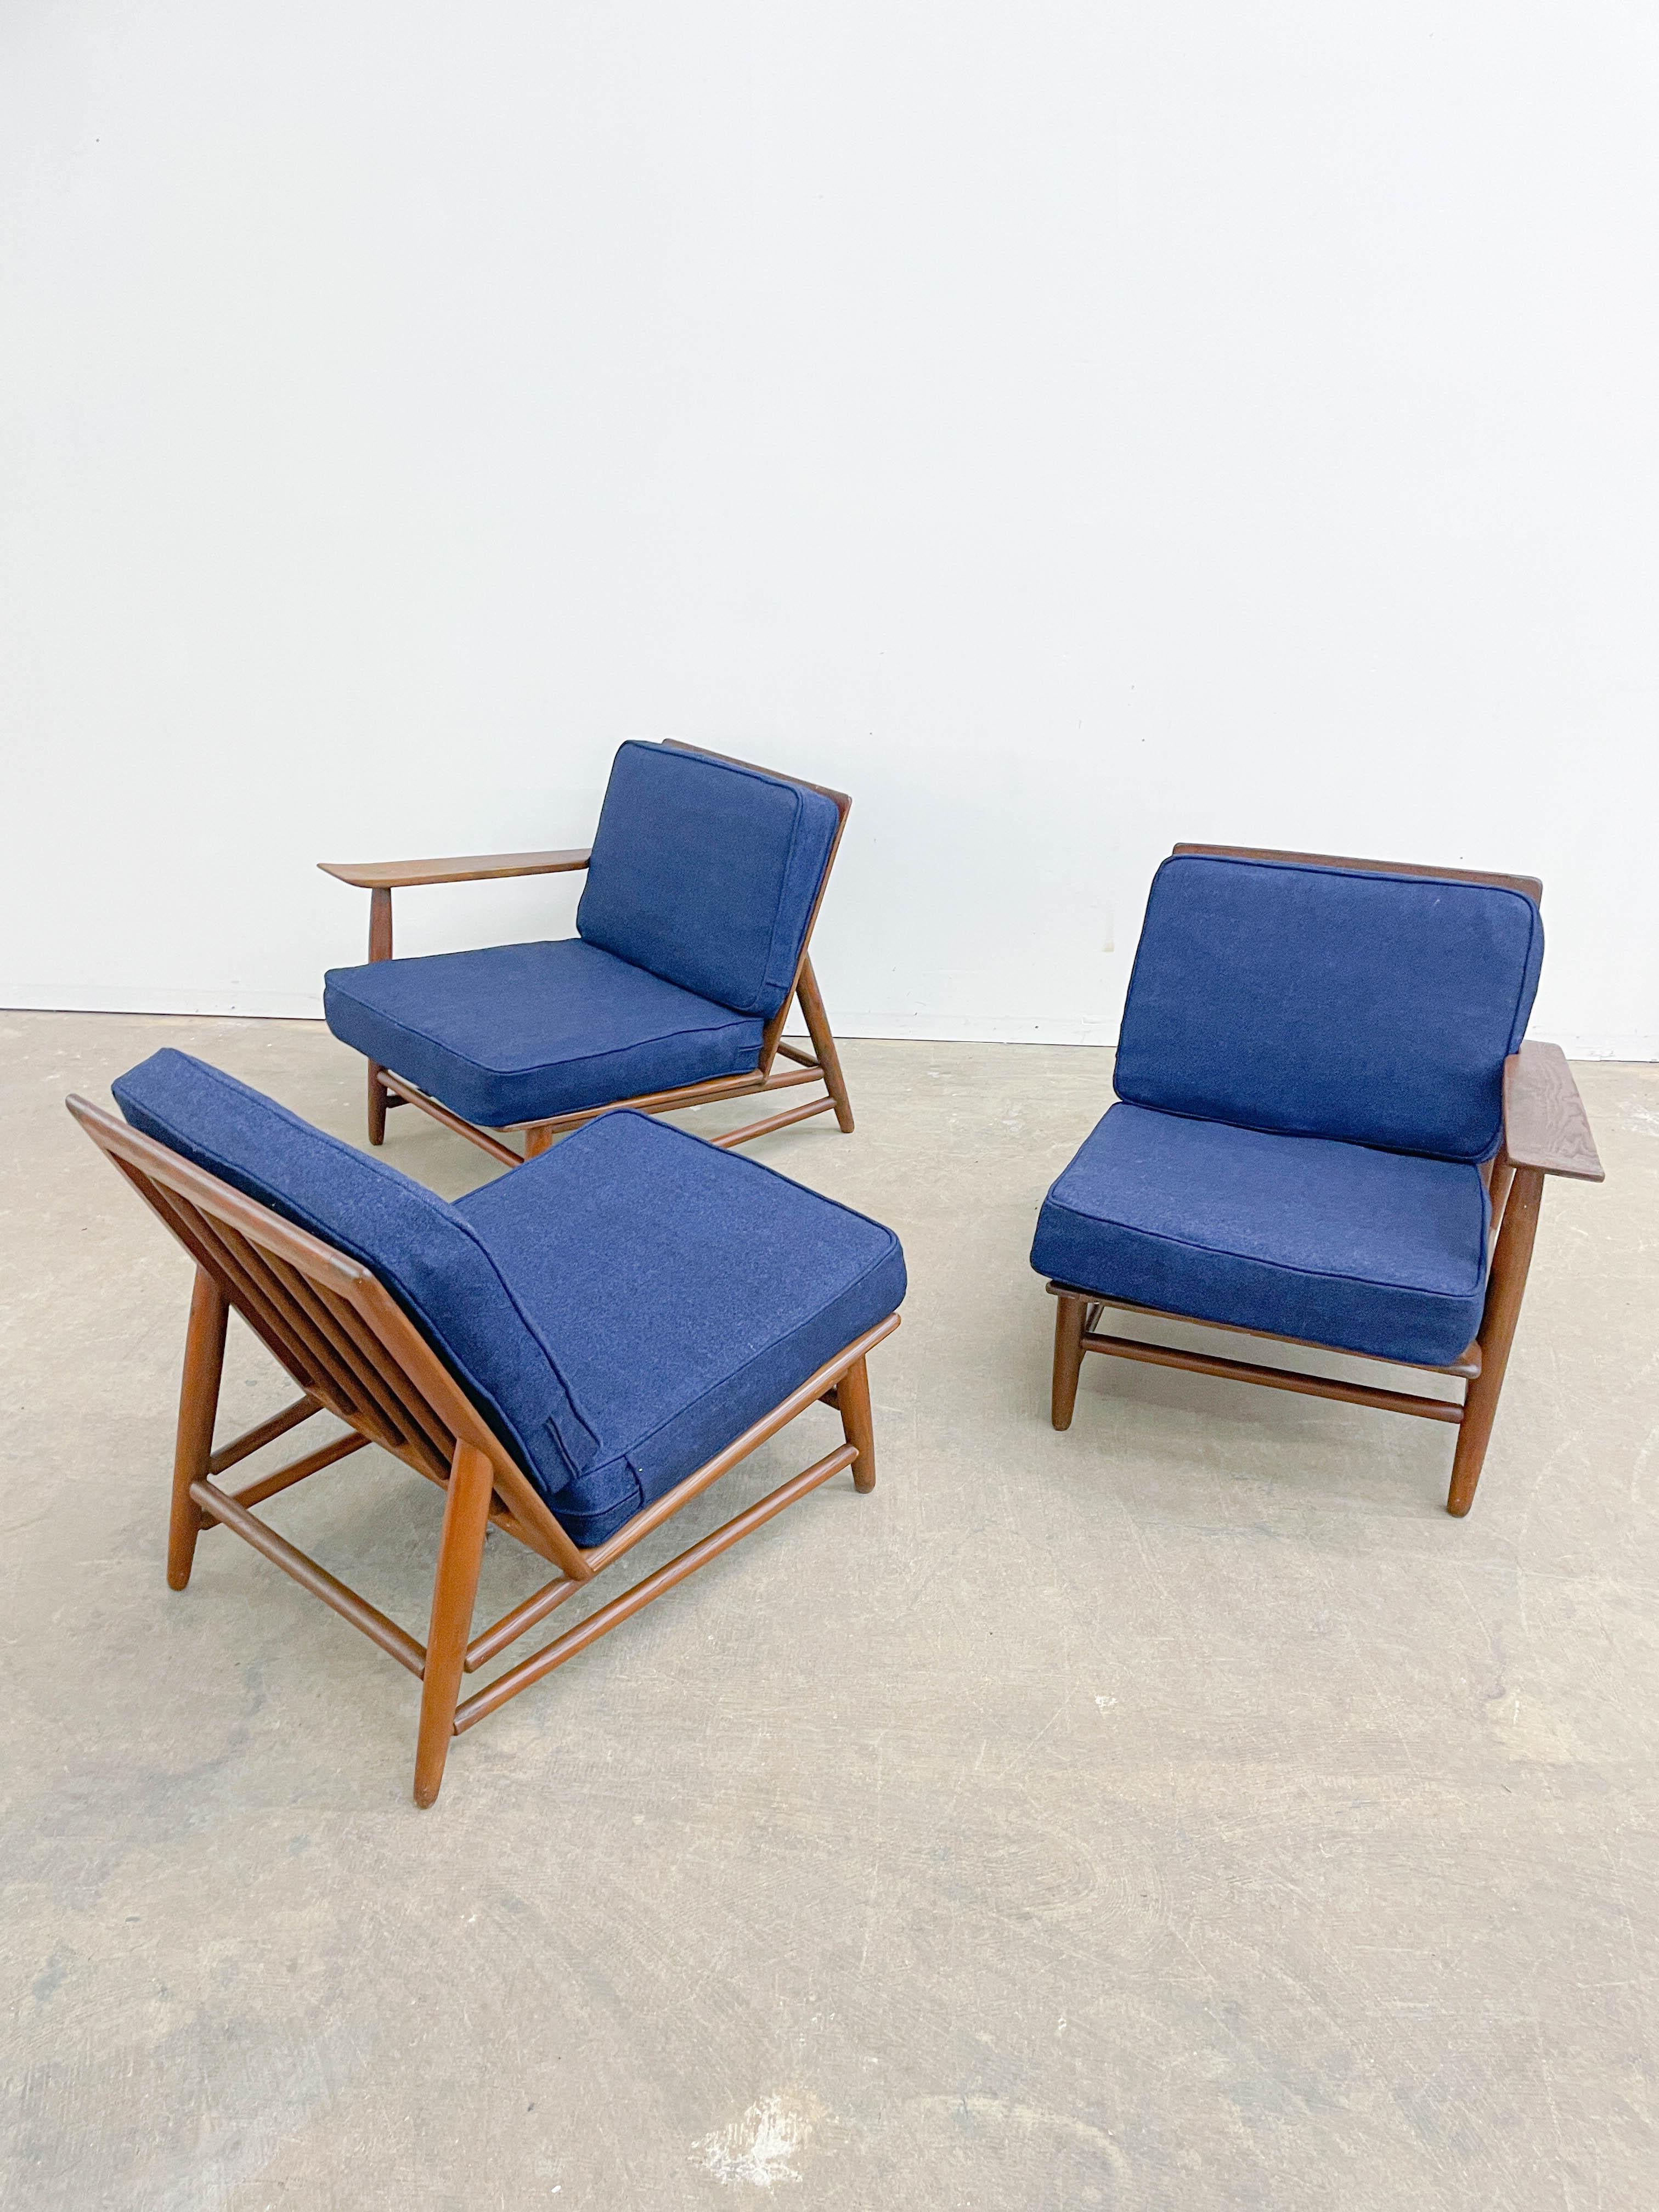 Modular seating made by Heywood Wakefield in the 1950s, strongly influenced by George Nakashima’s designs. With its subtly upturned plank arm rests and spindle stretchers these chairs are a nice combination of Japanese and Danish modernism. New